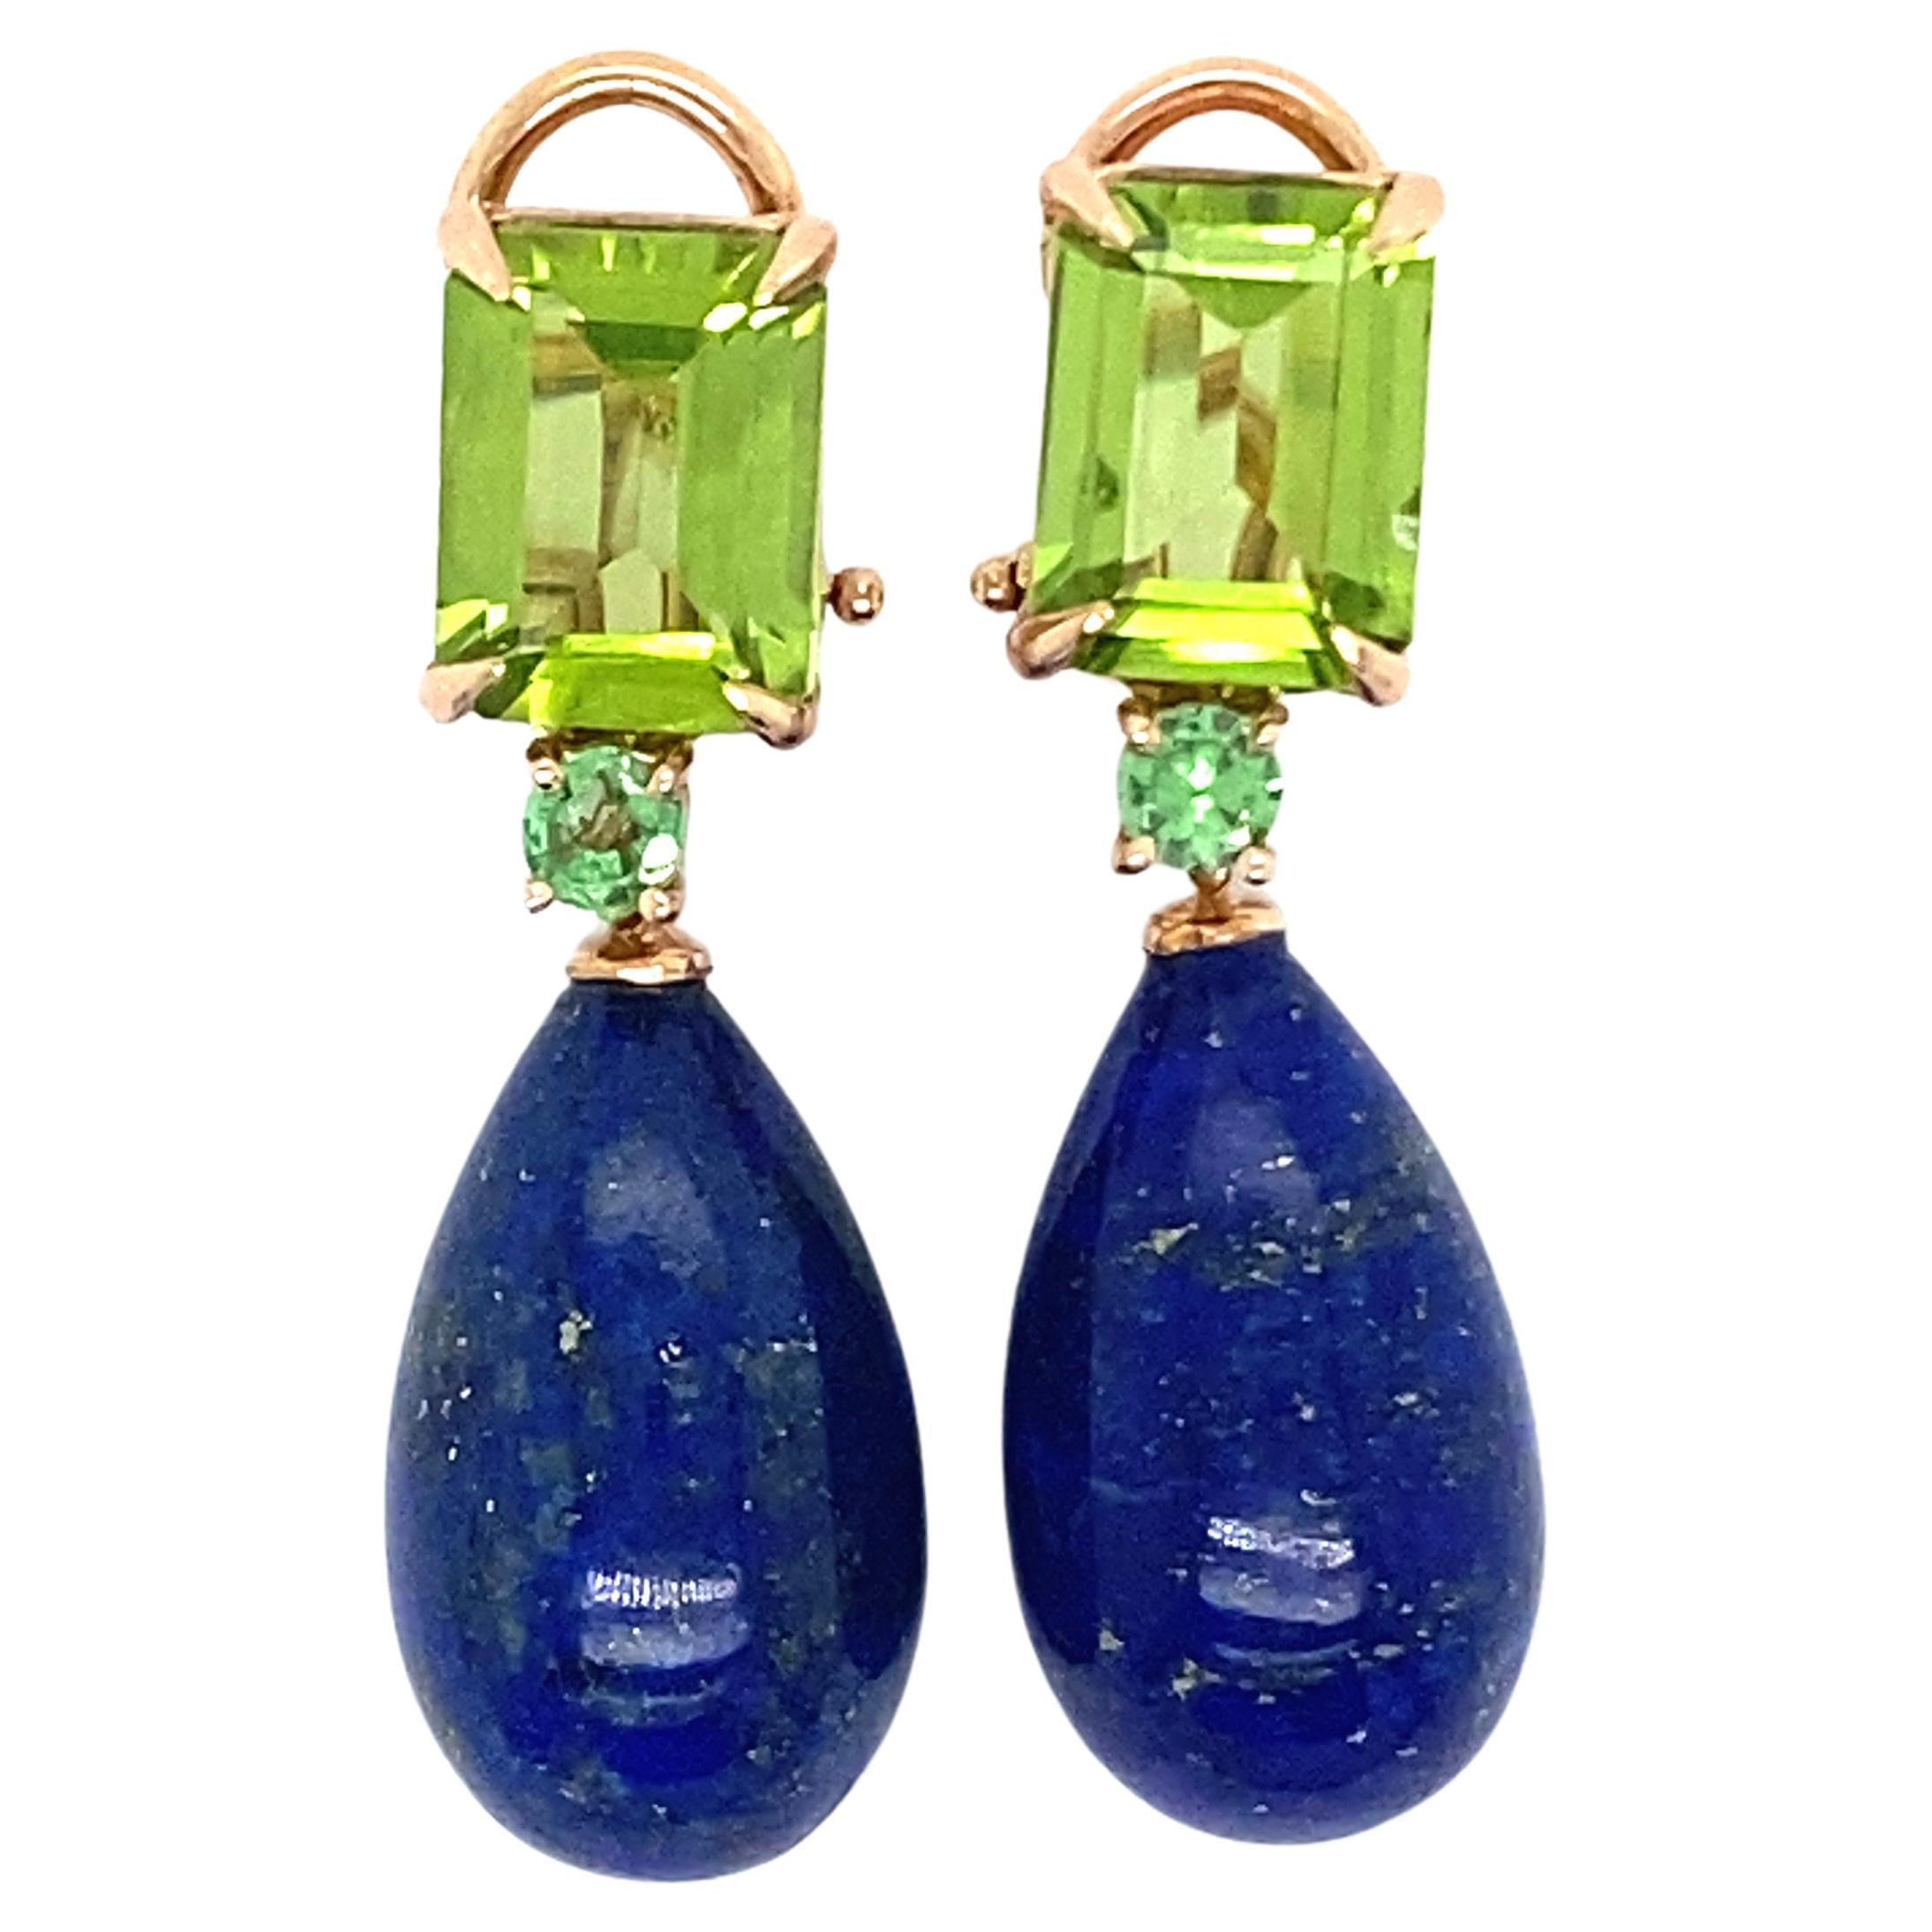 Discover these magnificent 18-carat rose gold earrings, an exceptional creation from the French collection by Mesure et Art du Temps. These earrings are truly majestic, adorned with two peridots, two tsavorites and two lapis lazuli drops, creating a